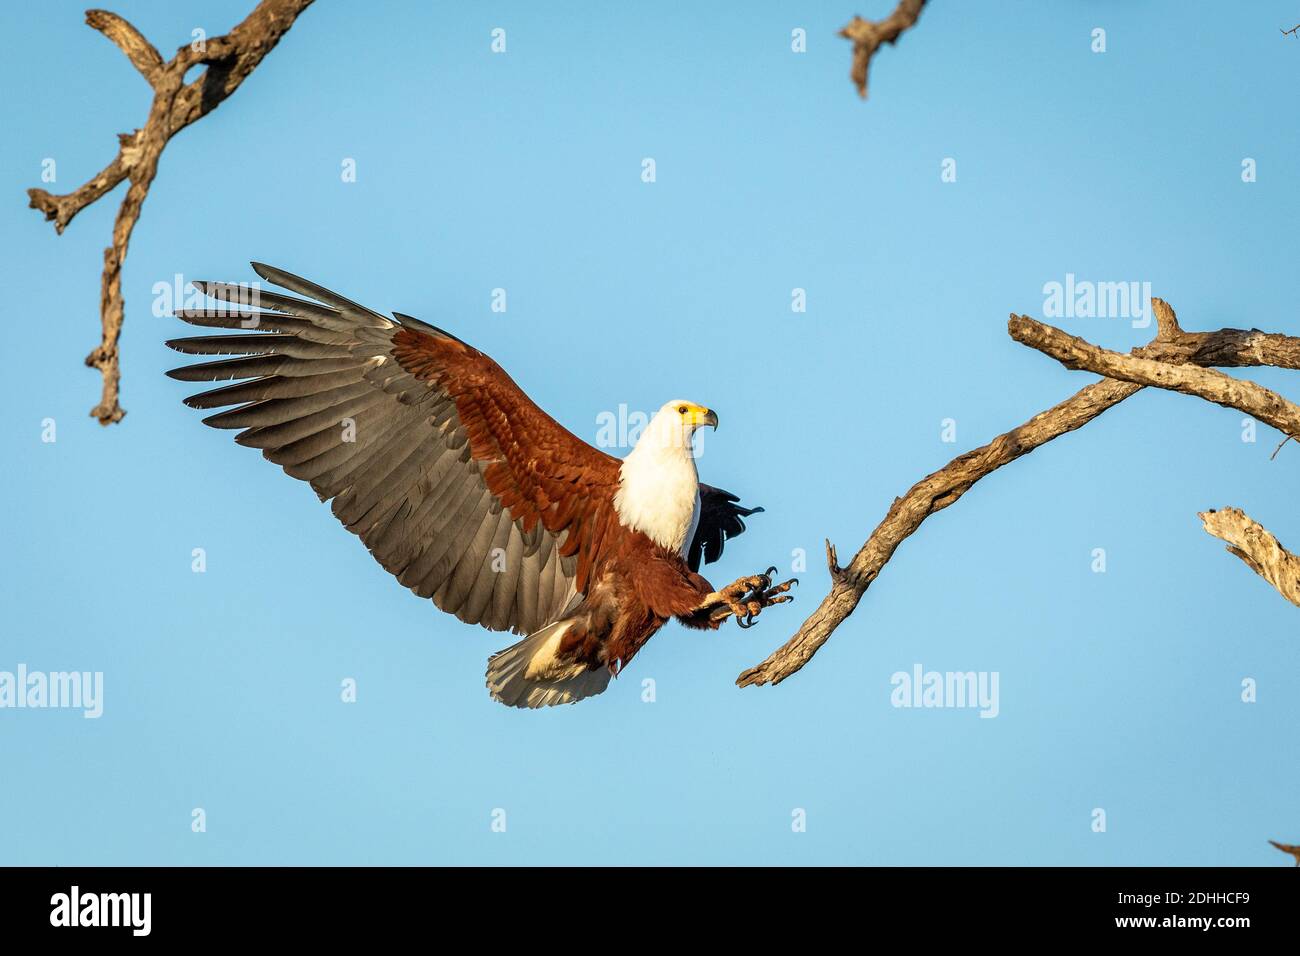 Fish Eagle (Haliaeetus vocifer) with its wings wide open trying to land on a tree branch in Kruger Park in South Africa Stock Photo